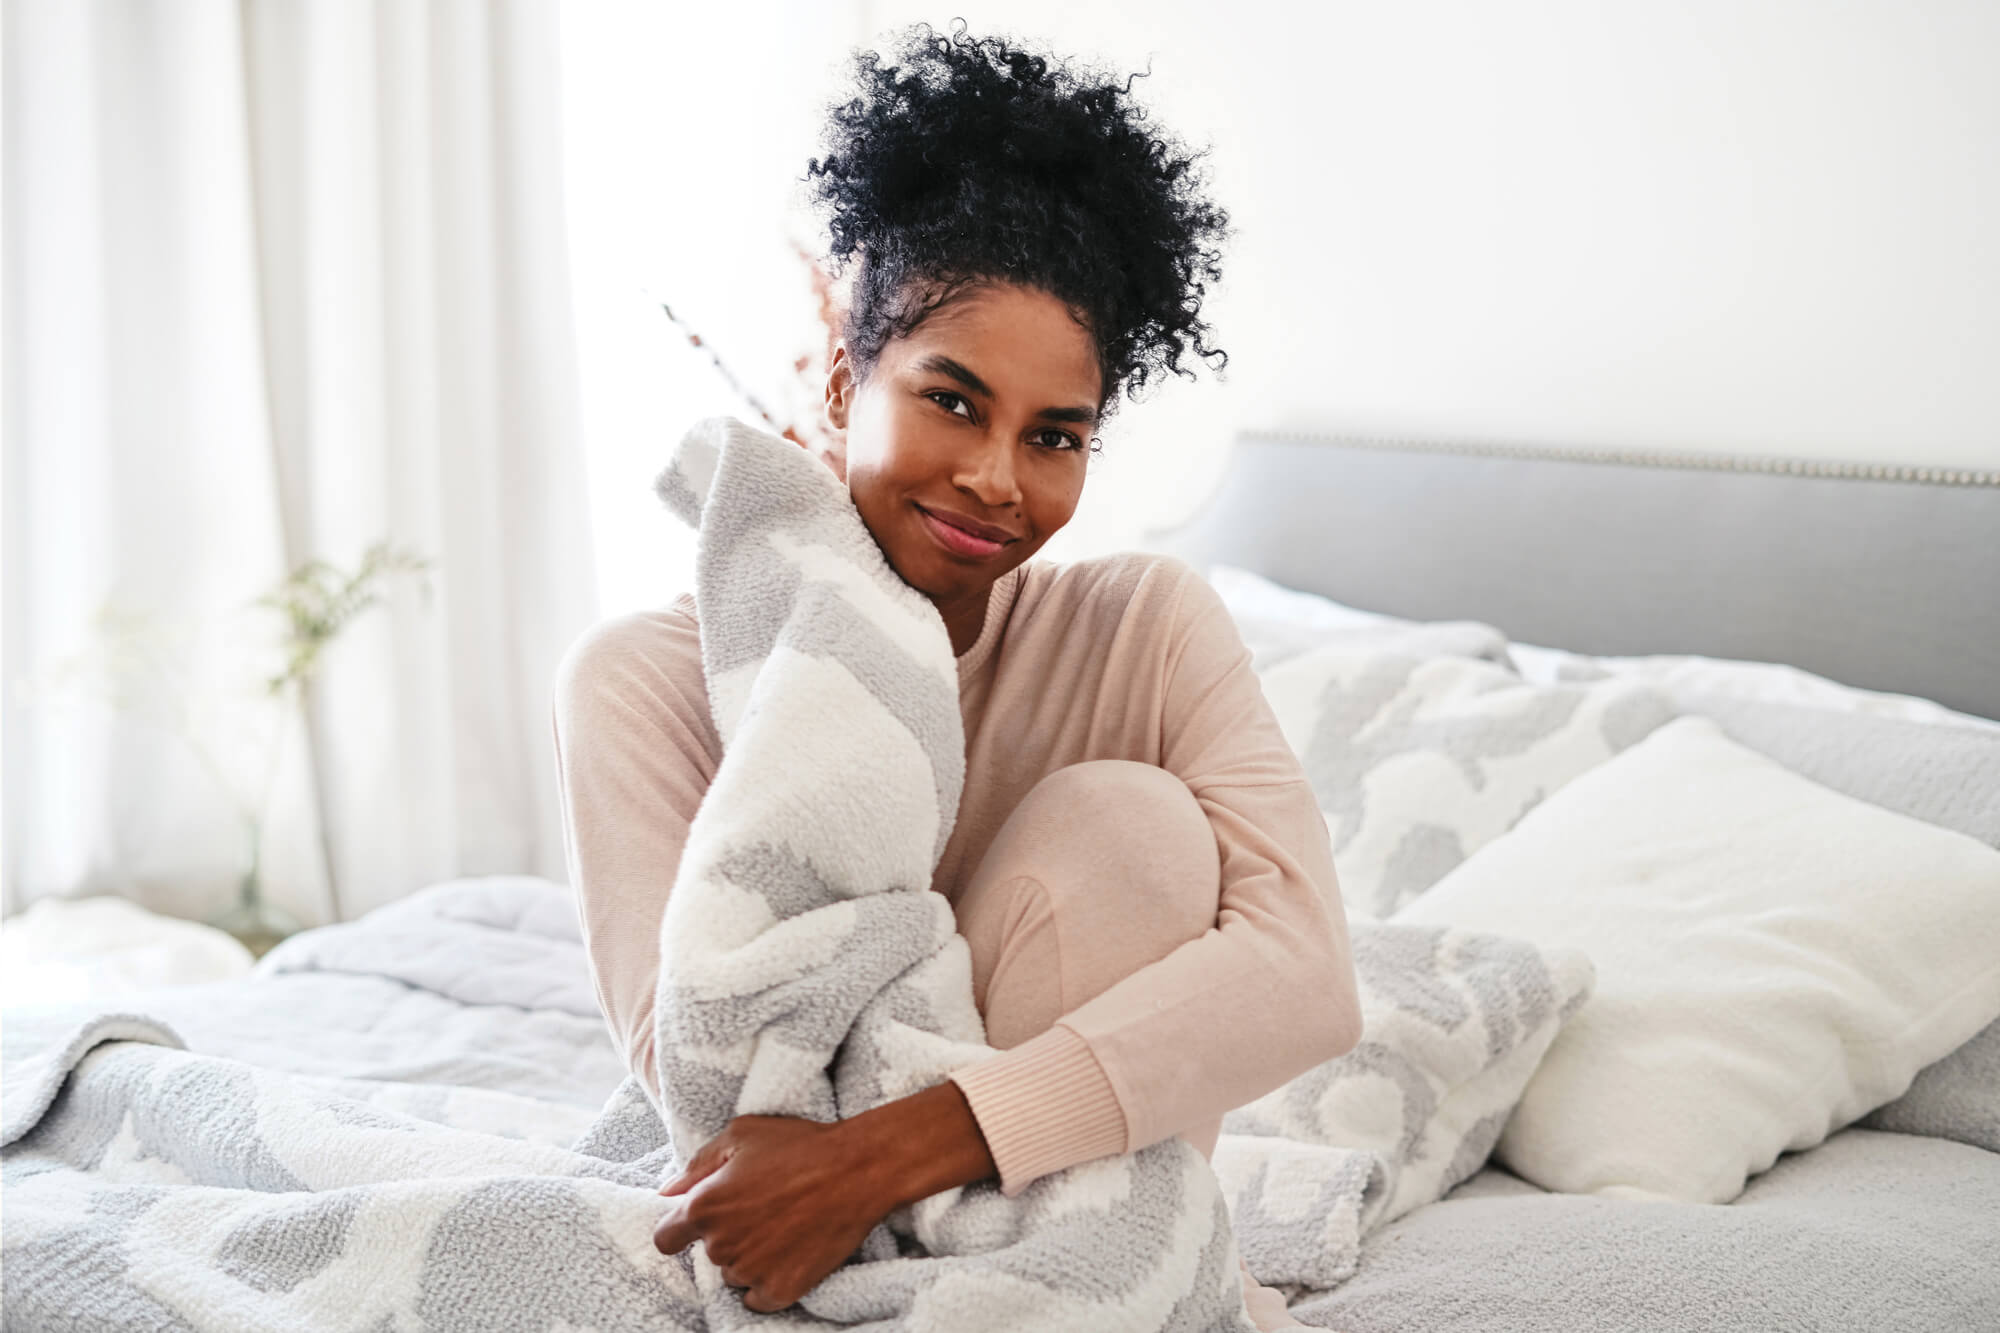 Woman cozied up to snuggly blanket. Woman snuggling cozy blanket. Woman hugging cozy blanket. Woman sitting in bed with cozy blanket. Woman smiling with comfiest blanket.